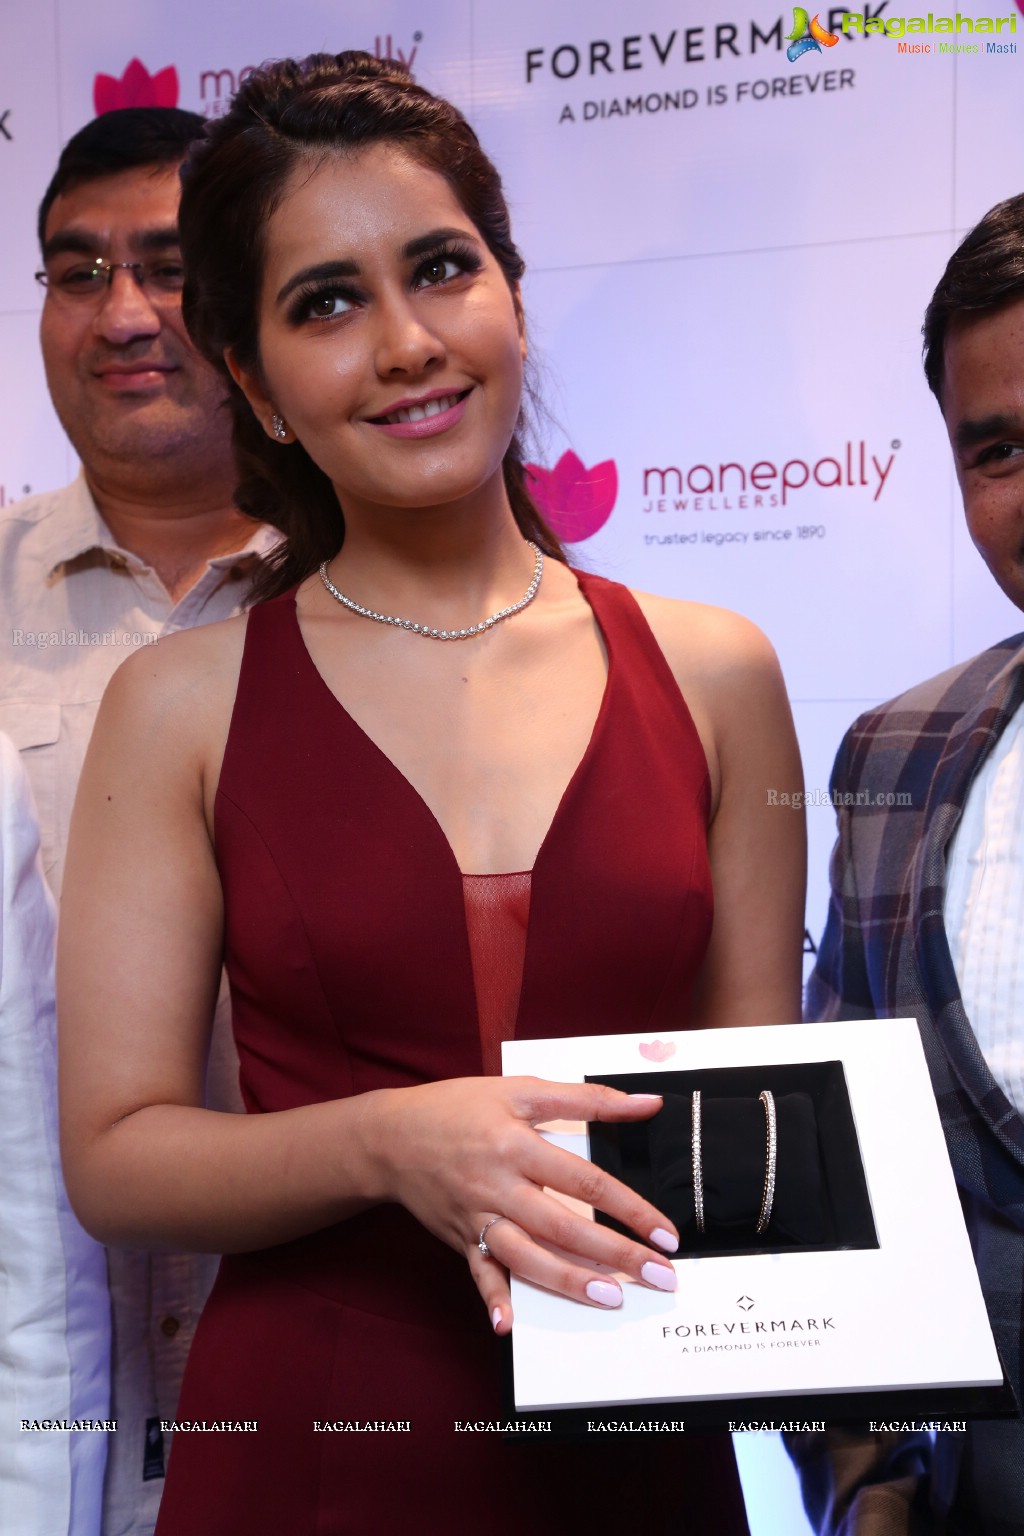 Manepally Jewellers launches Forevermark in Hyderabad